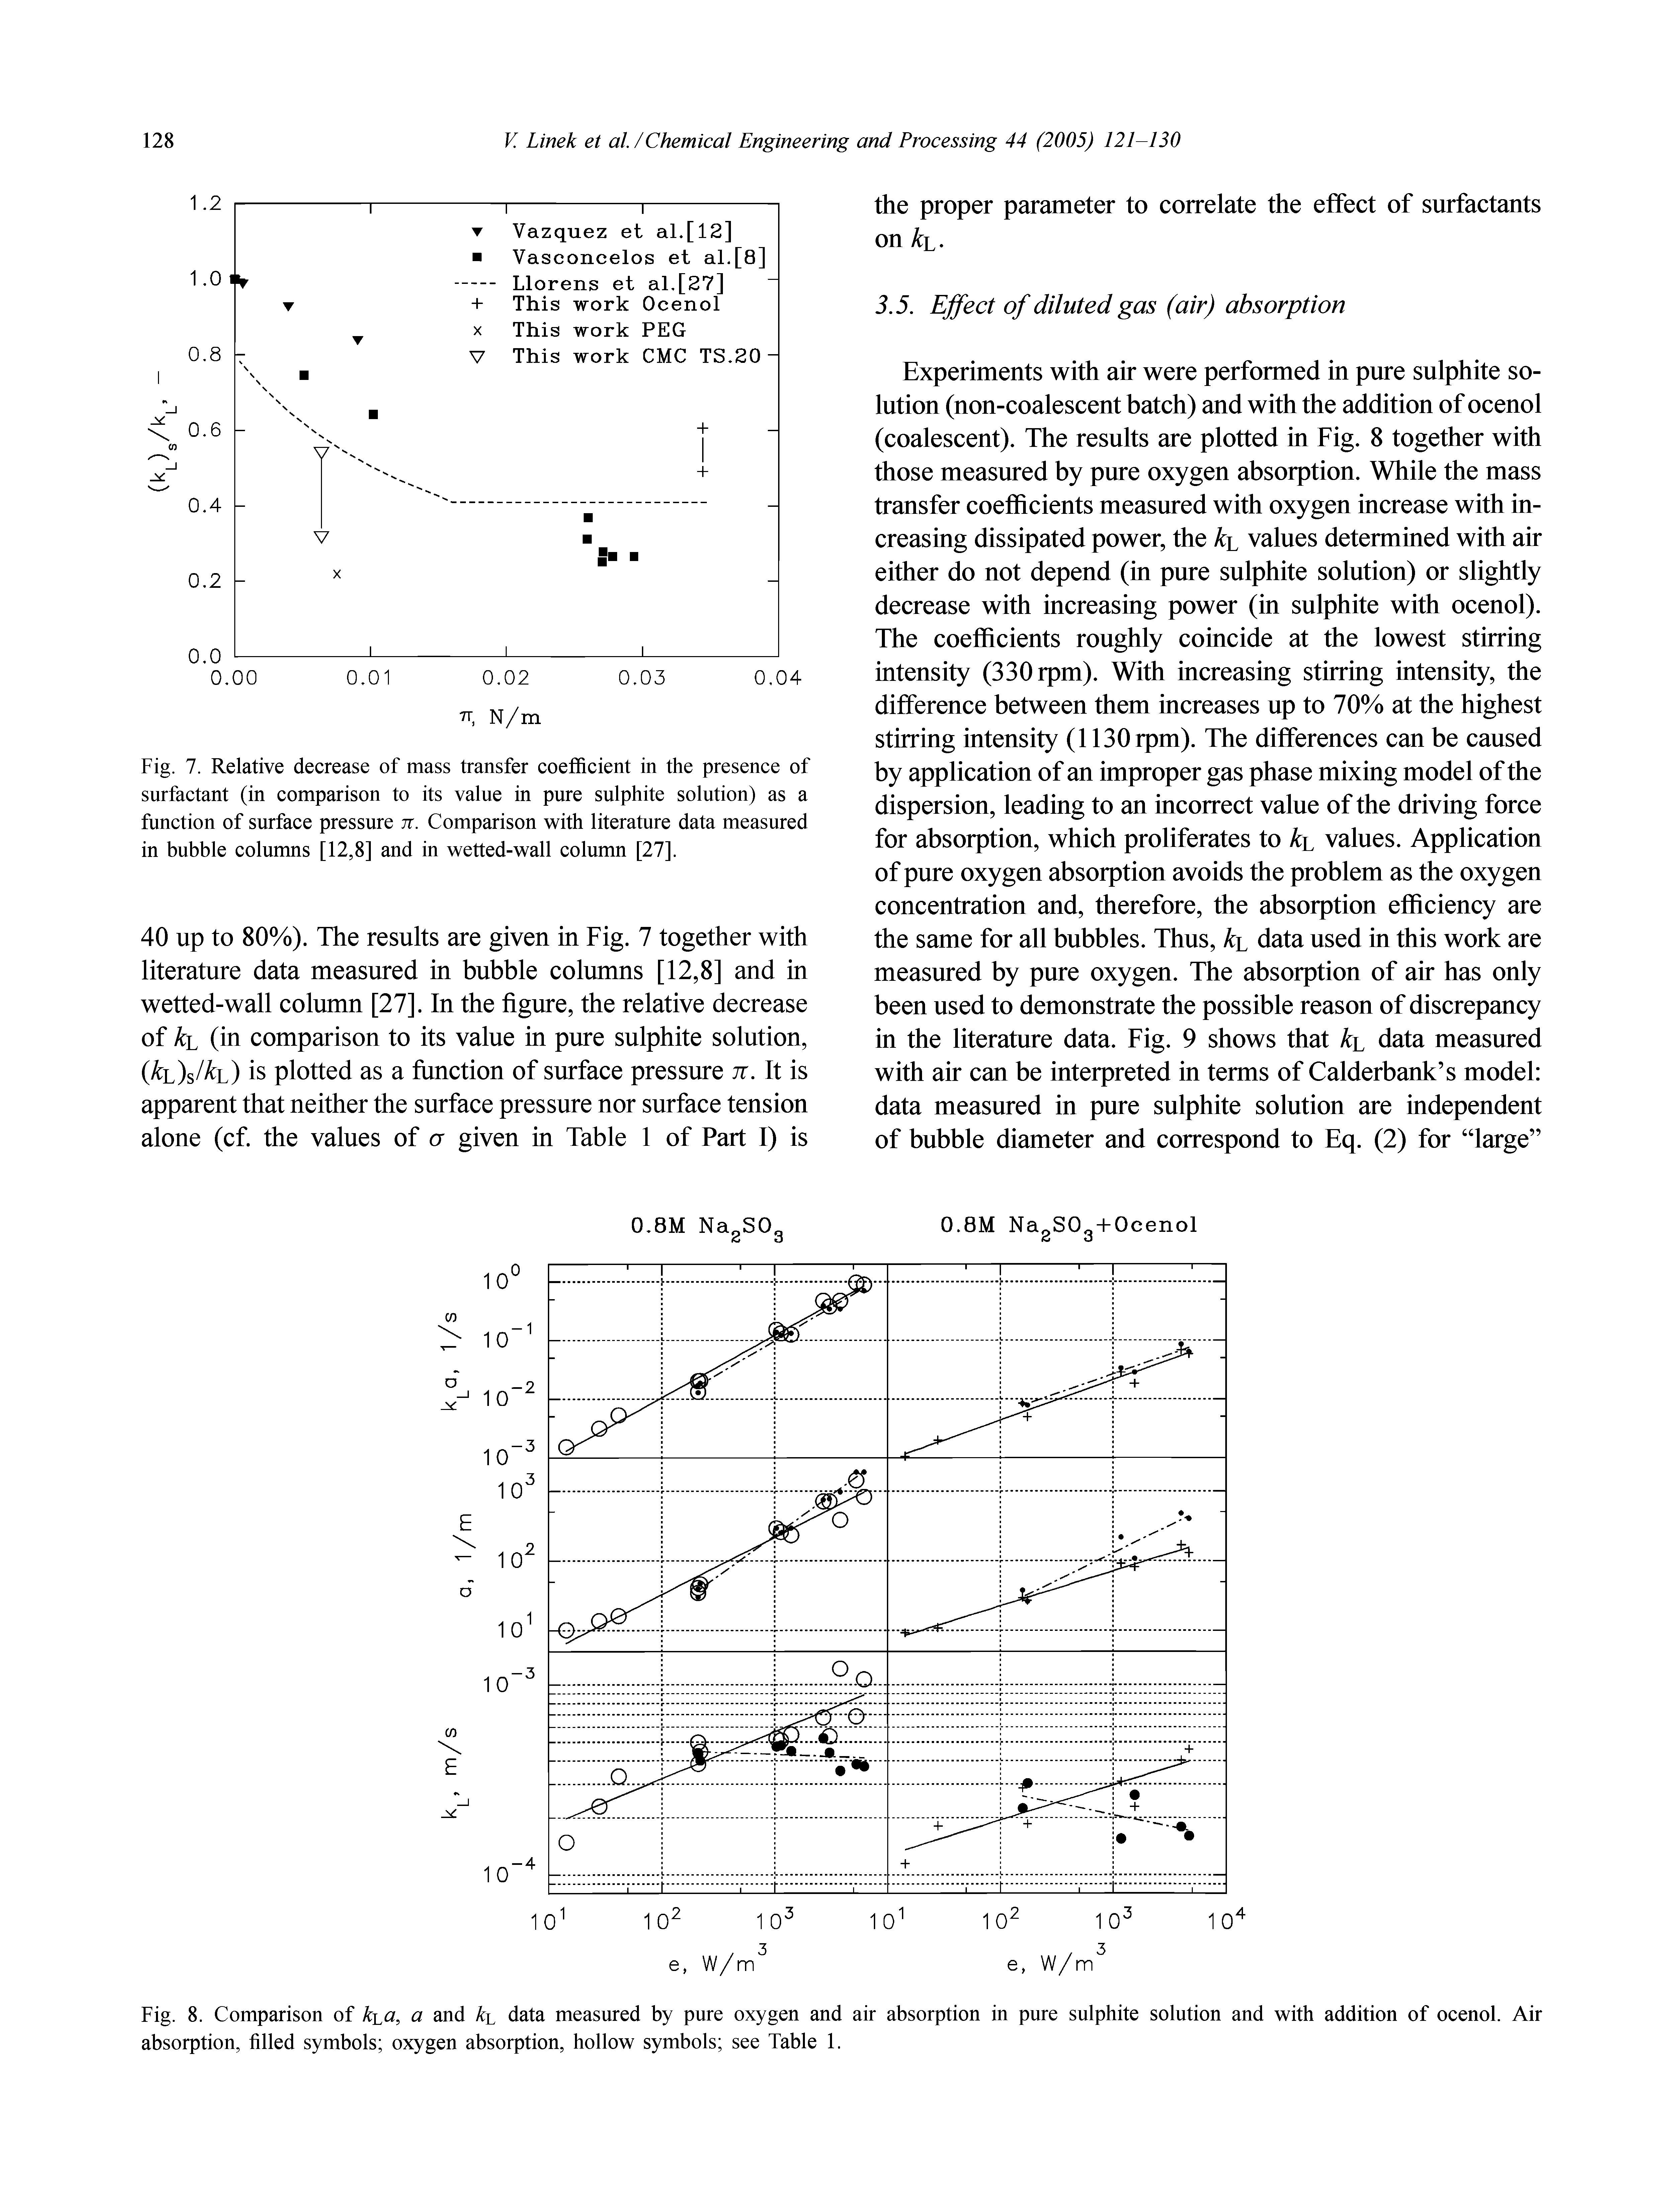 Fig. 7. Relative decrease of mass transfer coefficient in the presence of surfactant (in comparison to its value in pure sulphite solution) as a function of surface pressure tt. Comparison with literature data measured in bubble columns [12,8] and in wetted-wall column [27].